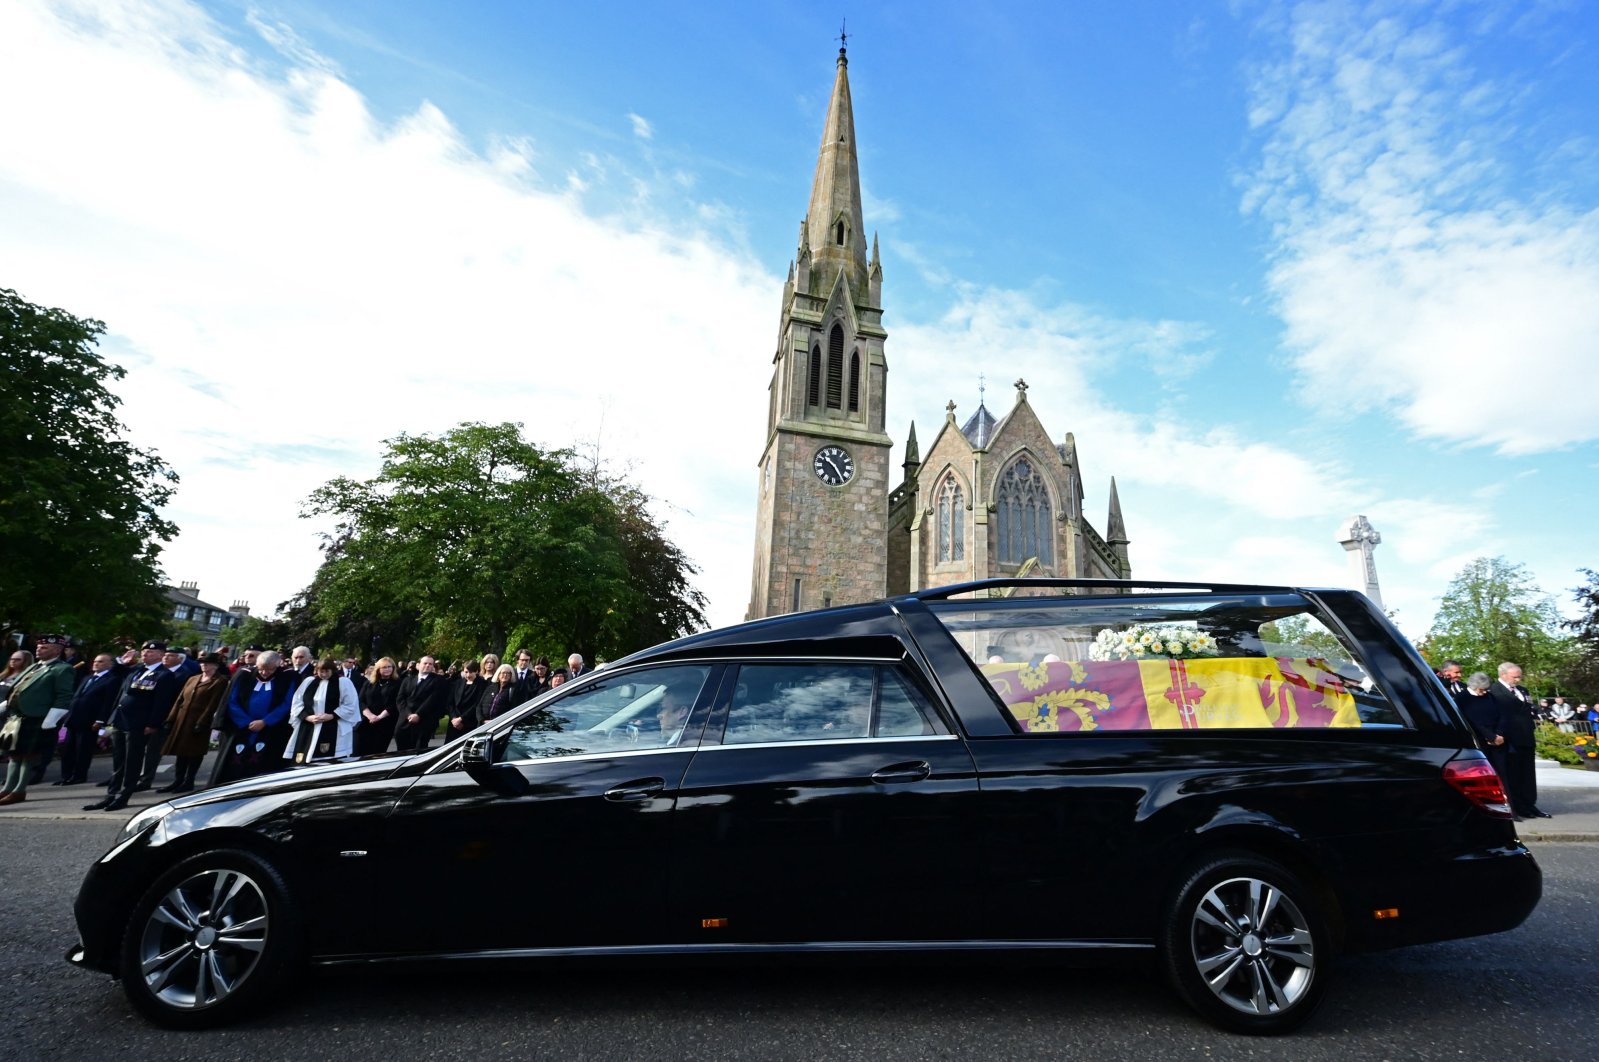 Members of the Public pay their respects as the hearse carrying the coffin of Queen Elizabeth II is driven through Ballater, Scotland, Sept. 11, 2022. (AFP Photo)